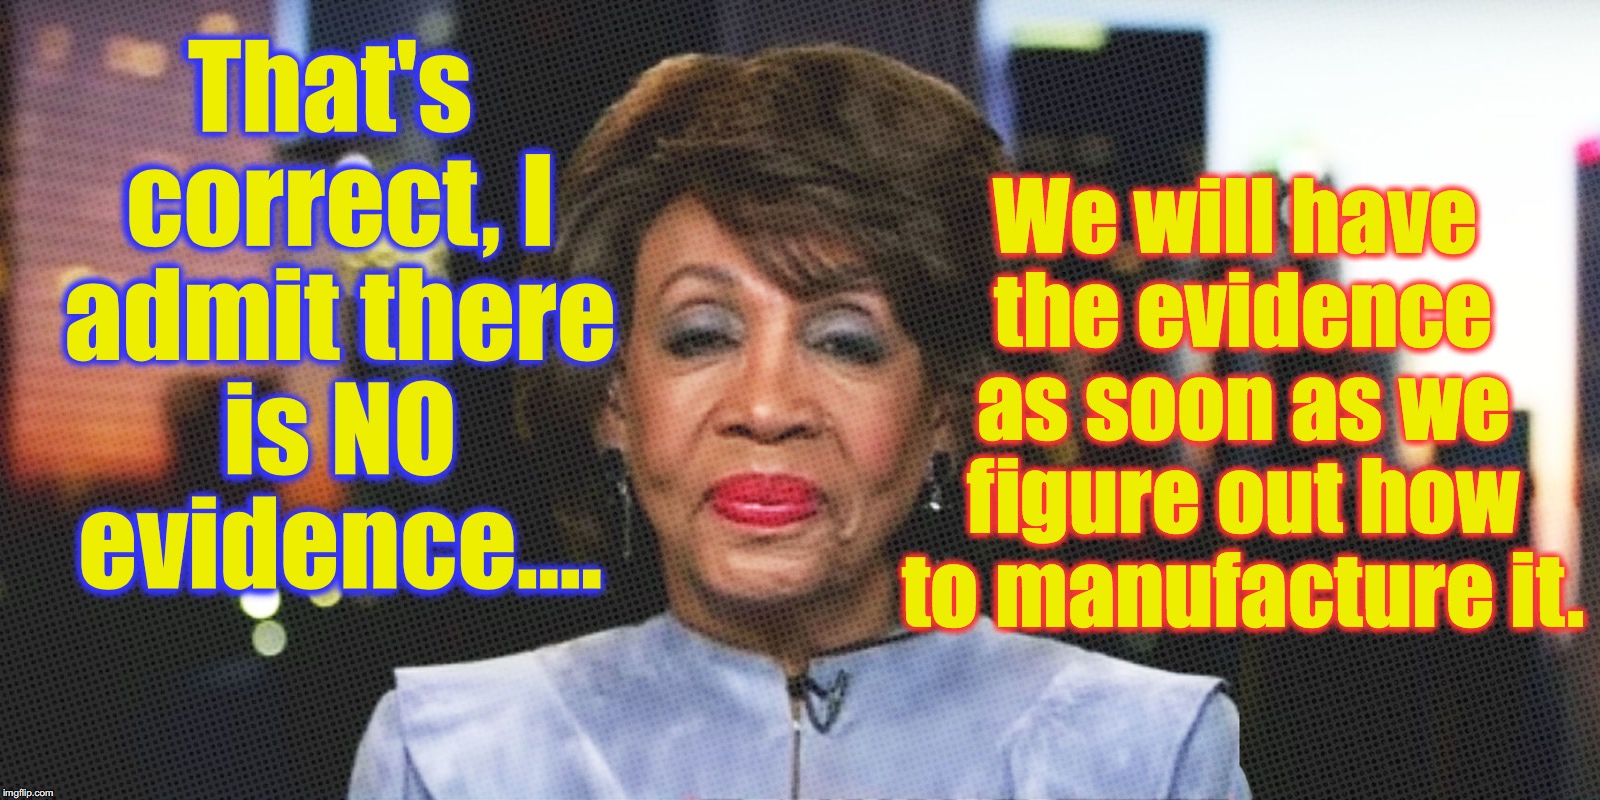 We will have the evidence as soon as we figure out how to manufacture it. That's correct, I admit there is NO evidence.... | image tagged in maxine waters crazy,russia | made w/ Imgflip meme maker